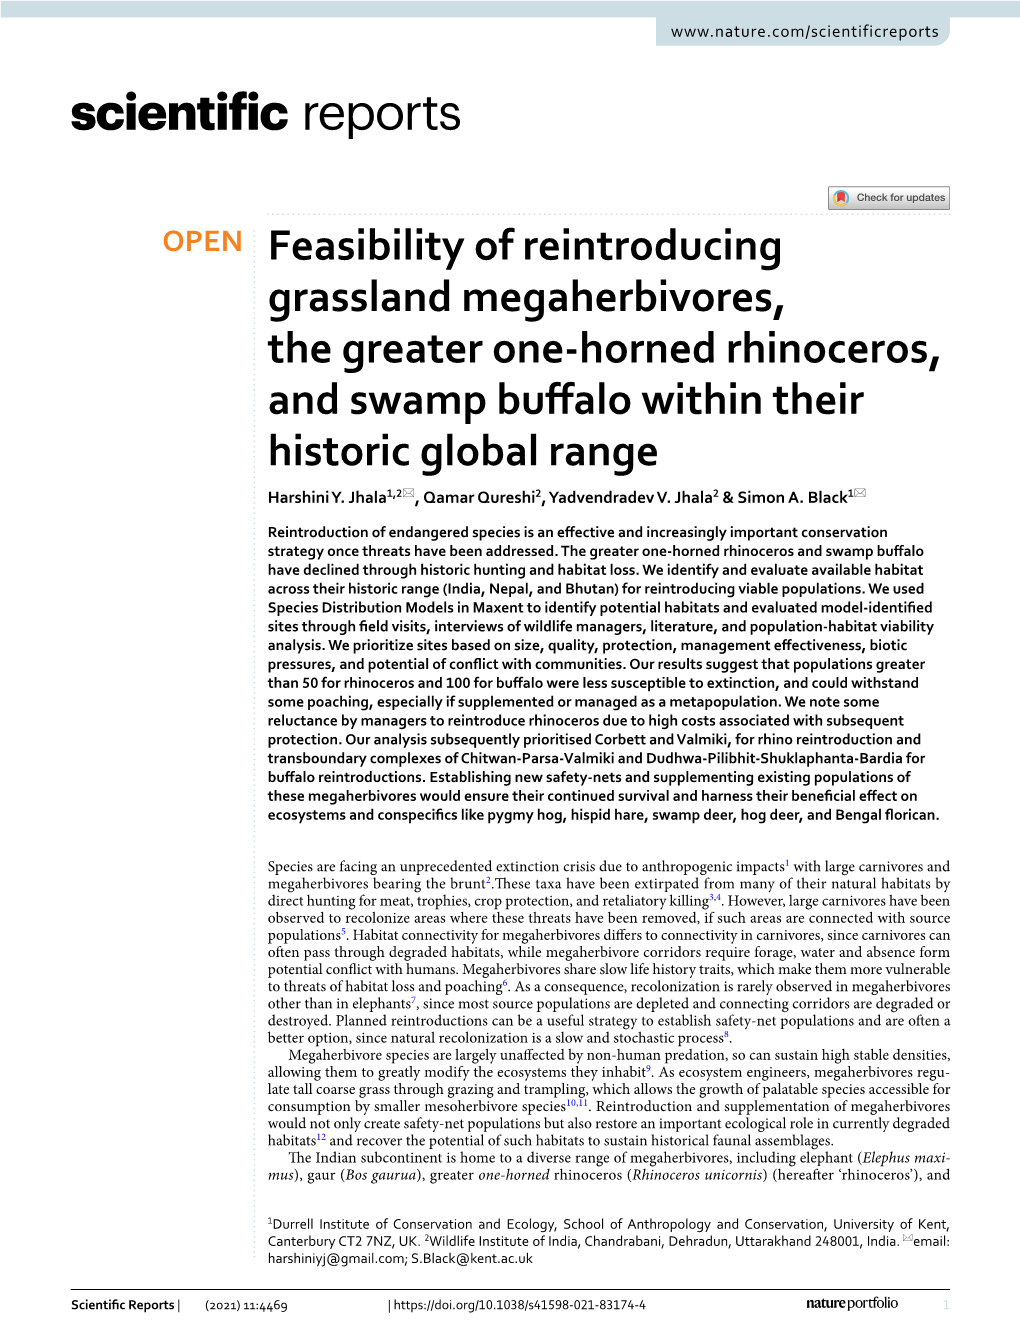 Feasibility of Reintroducing Grassland Megaherbivores, the Greater One‑Horned Rhinoceros, and Swamp Bufalo Within Their Historic Global Range Harshini Y